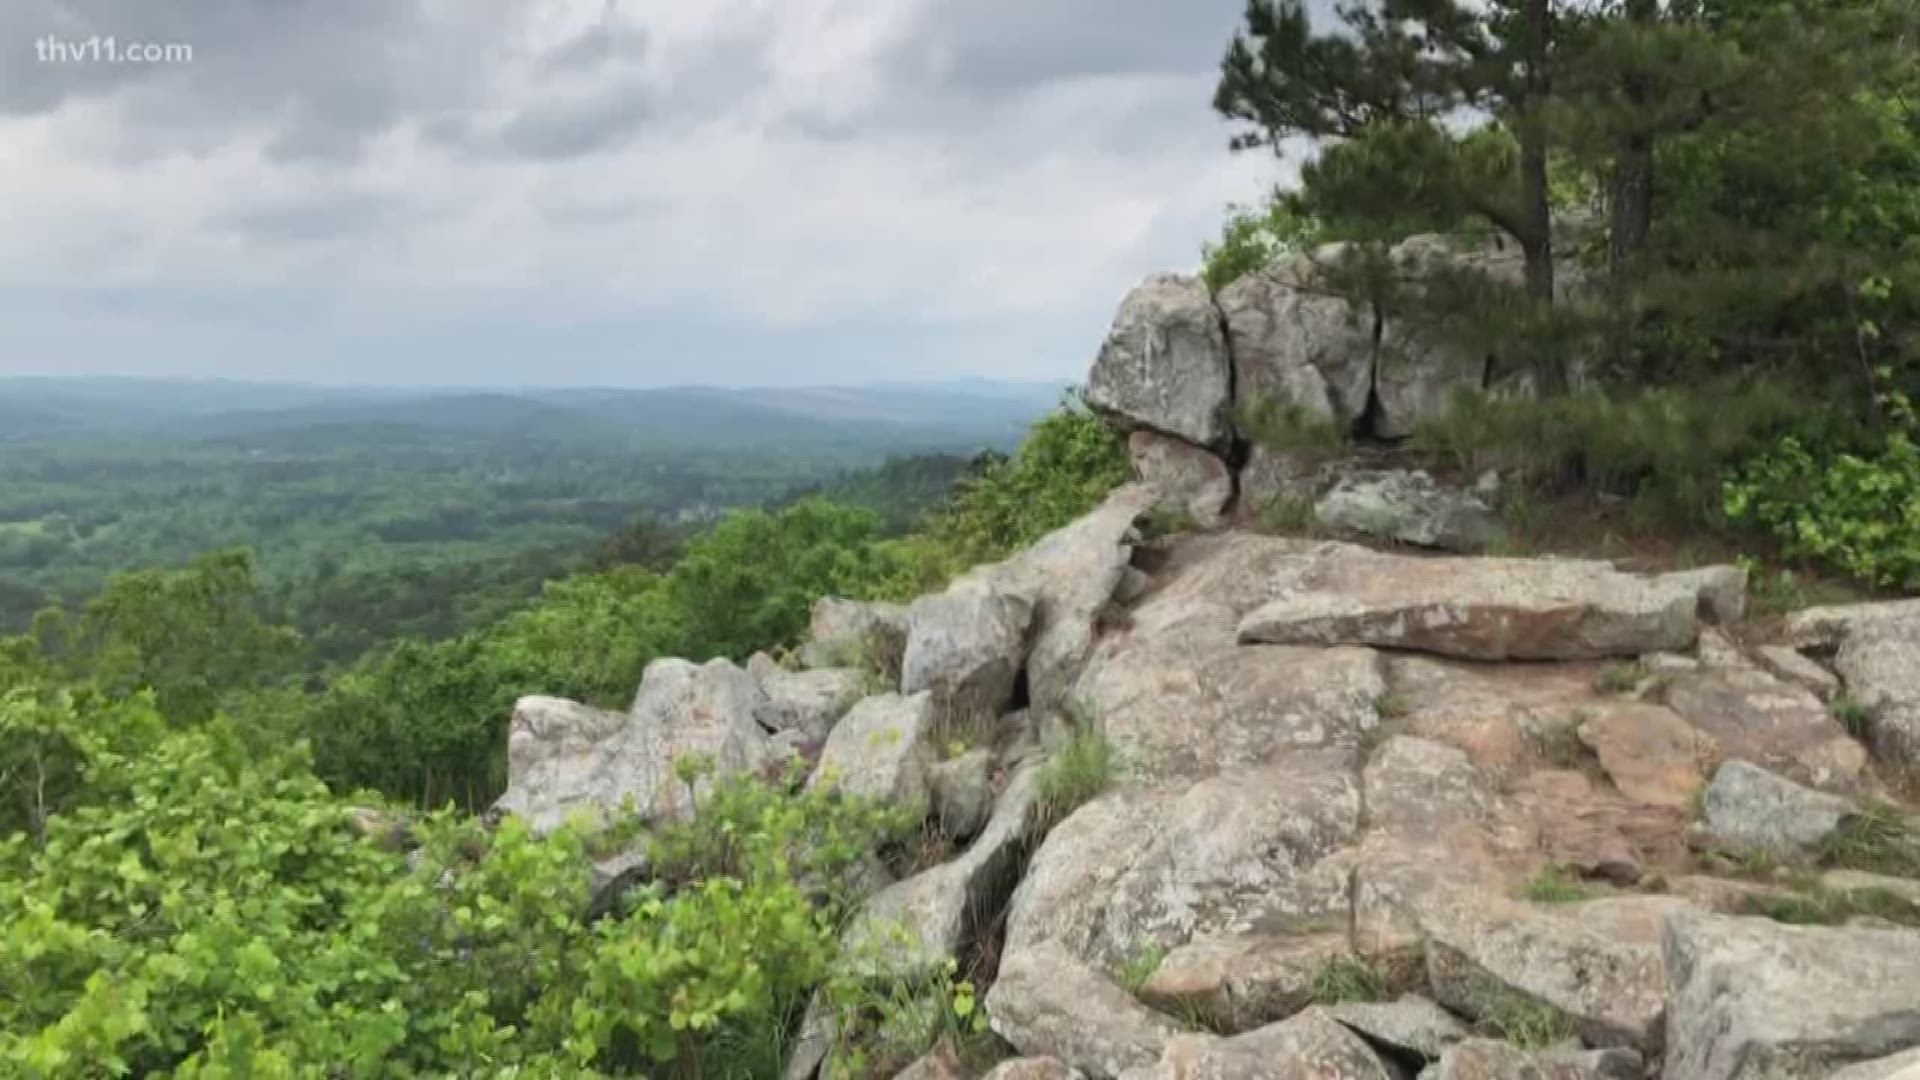 A new multi-purpose 6-mile trail will be opening later this spring just to the west of Pinnacle Mountain State Park.